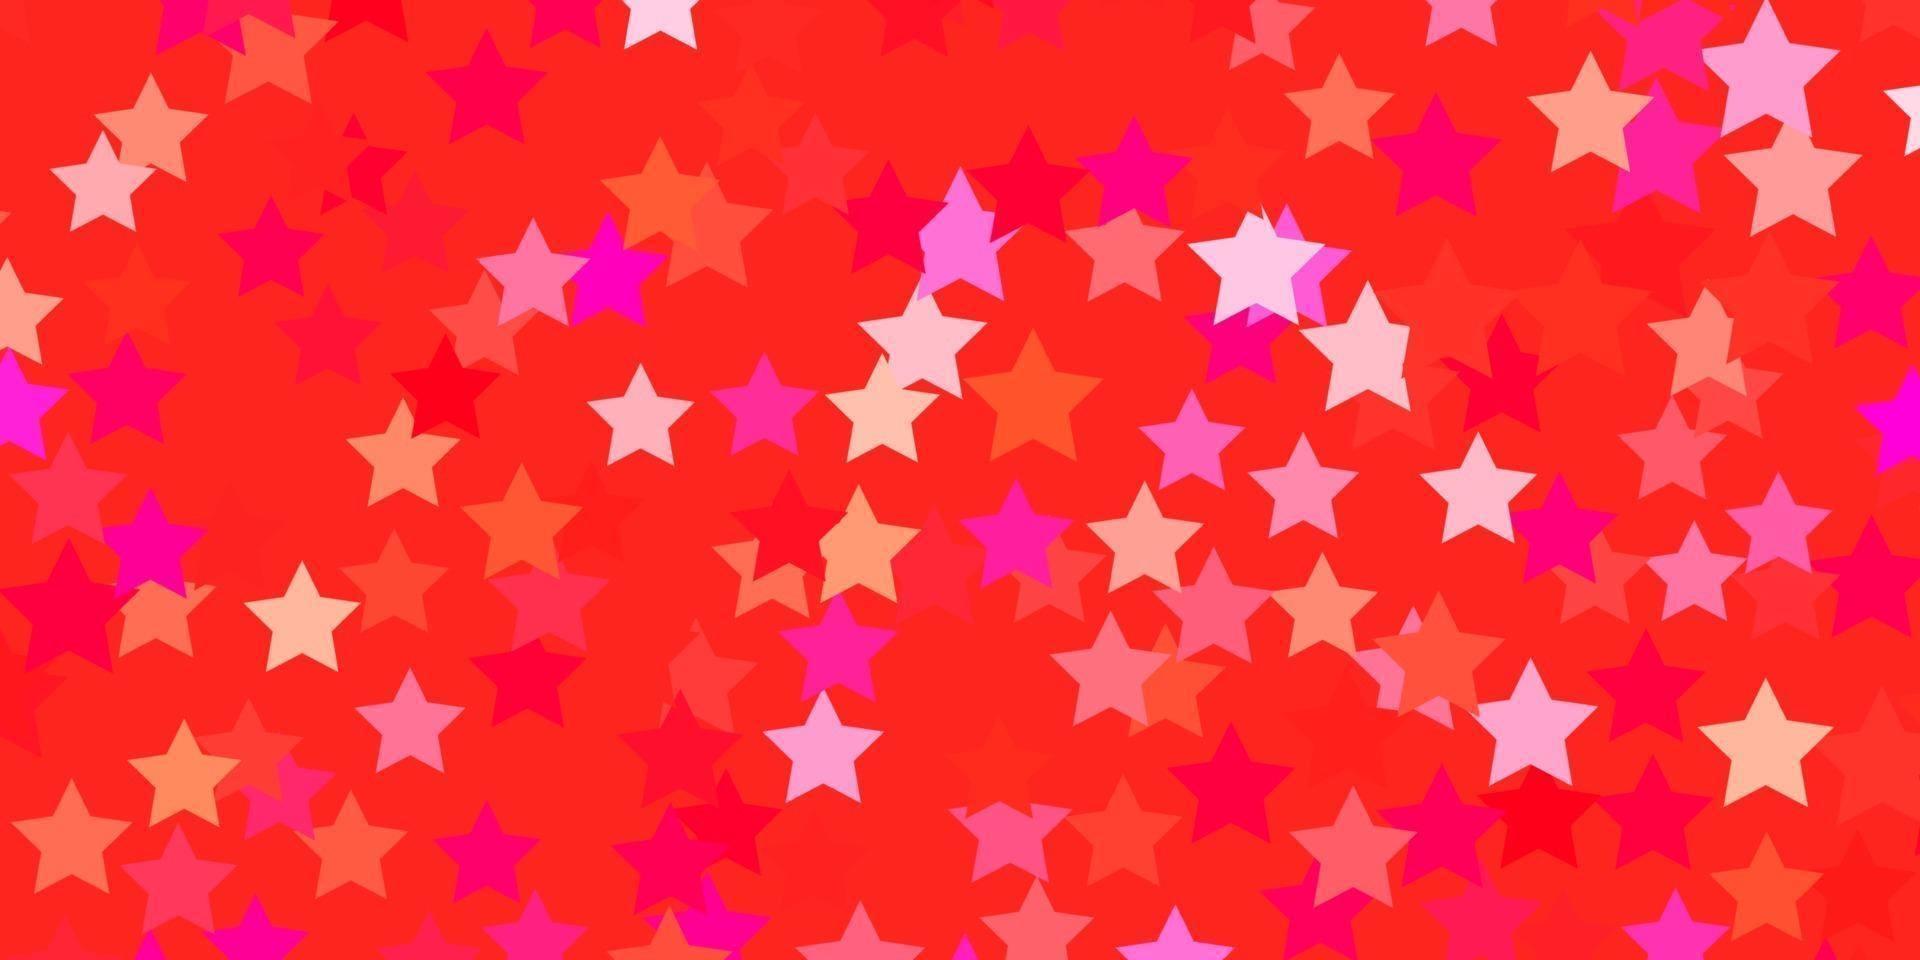 Light Pink vector template with neon stars.